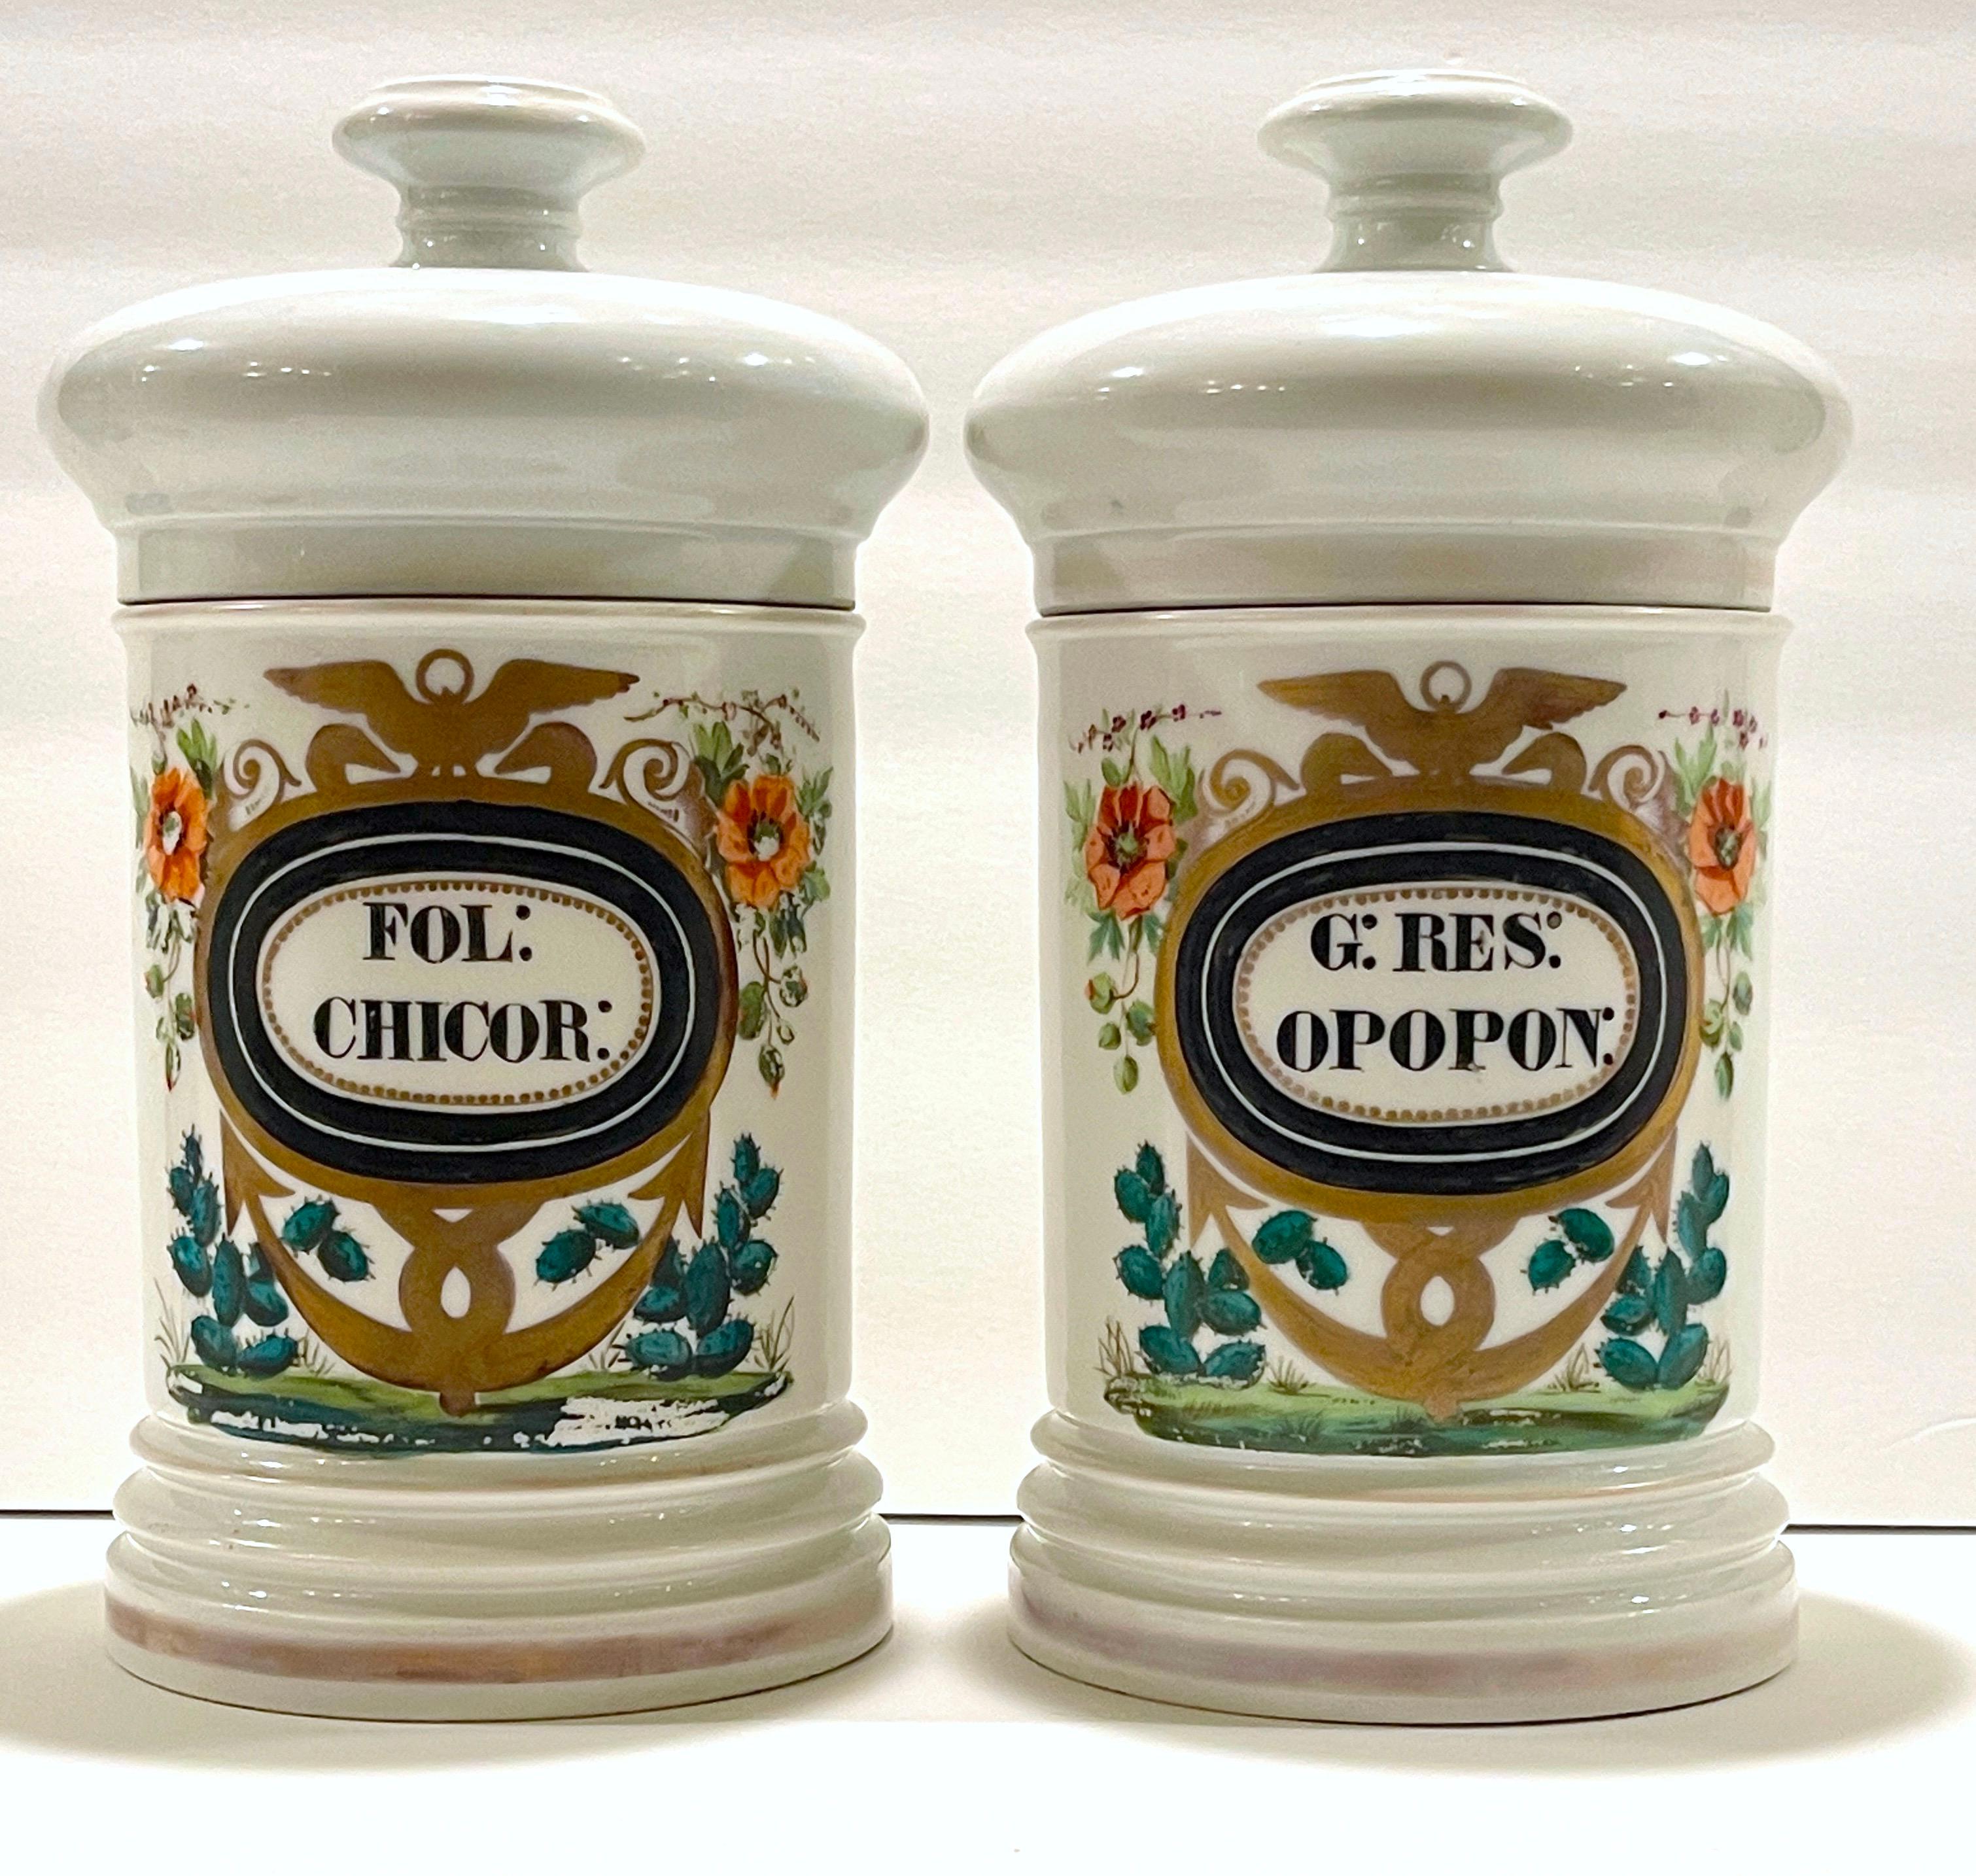 Pair 19th C. French Porcelain Cactus Motif Apothecary Jars by E.Renault Paris 
France, Mid to Late 19th century, probably made for the Mexican Market

Each one of substantial size, finely decorated within a stylized Caduceus vignette, labeled